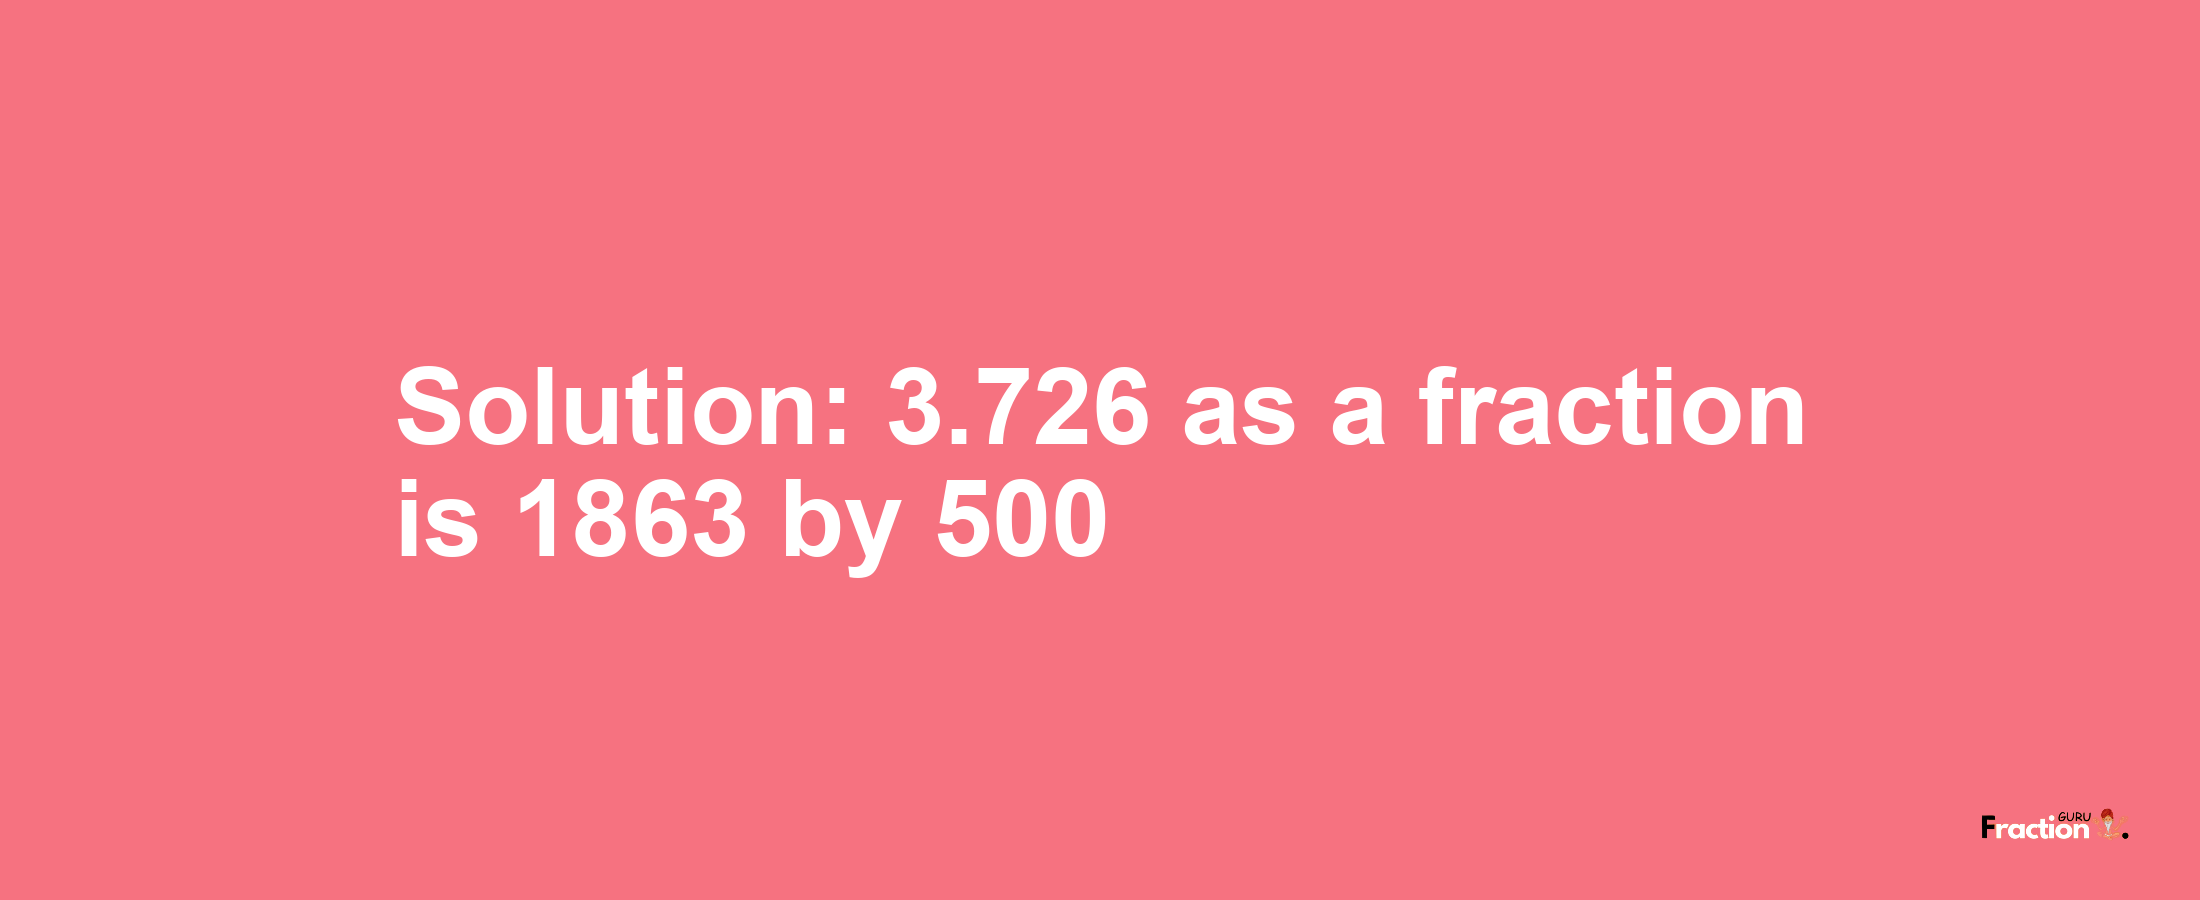 Solution:3.726 as a fraction is 1863/500